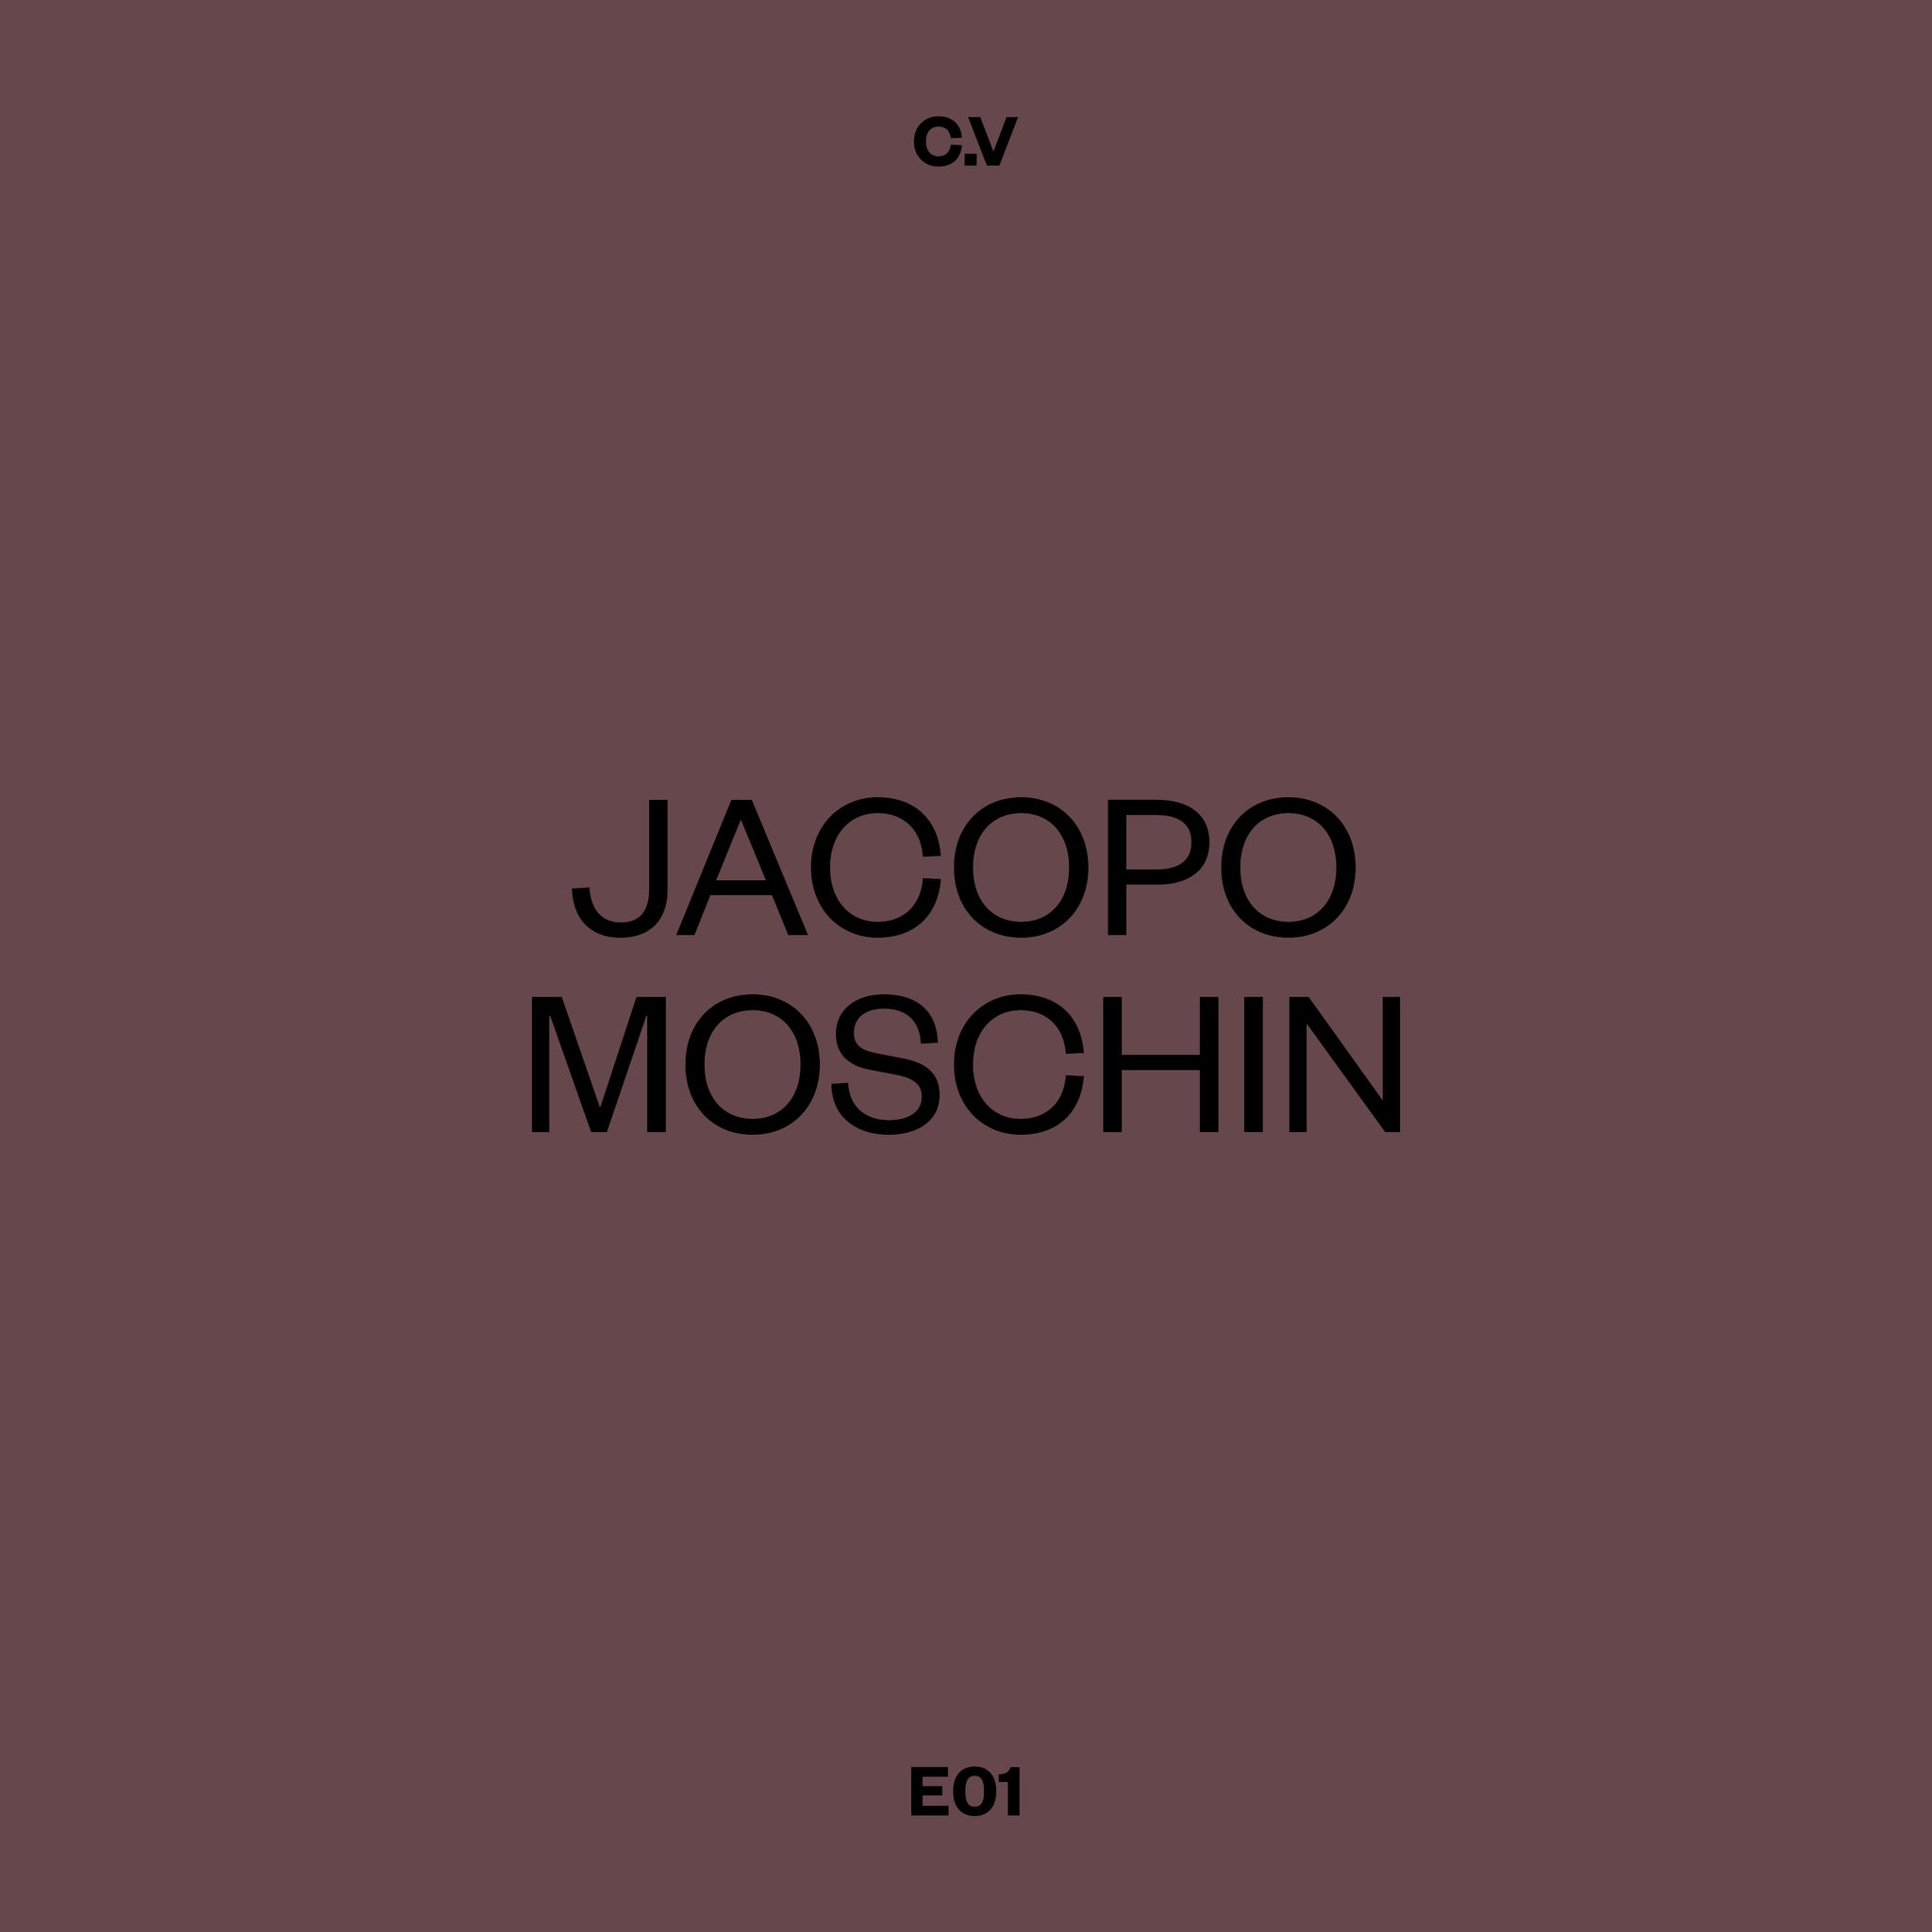 How to Be a Photographer in a Digital Age with Jacopo Moschin